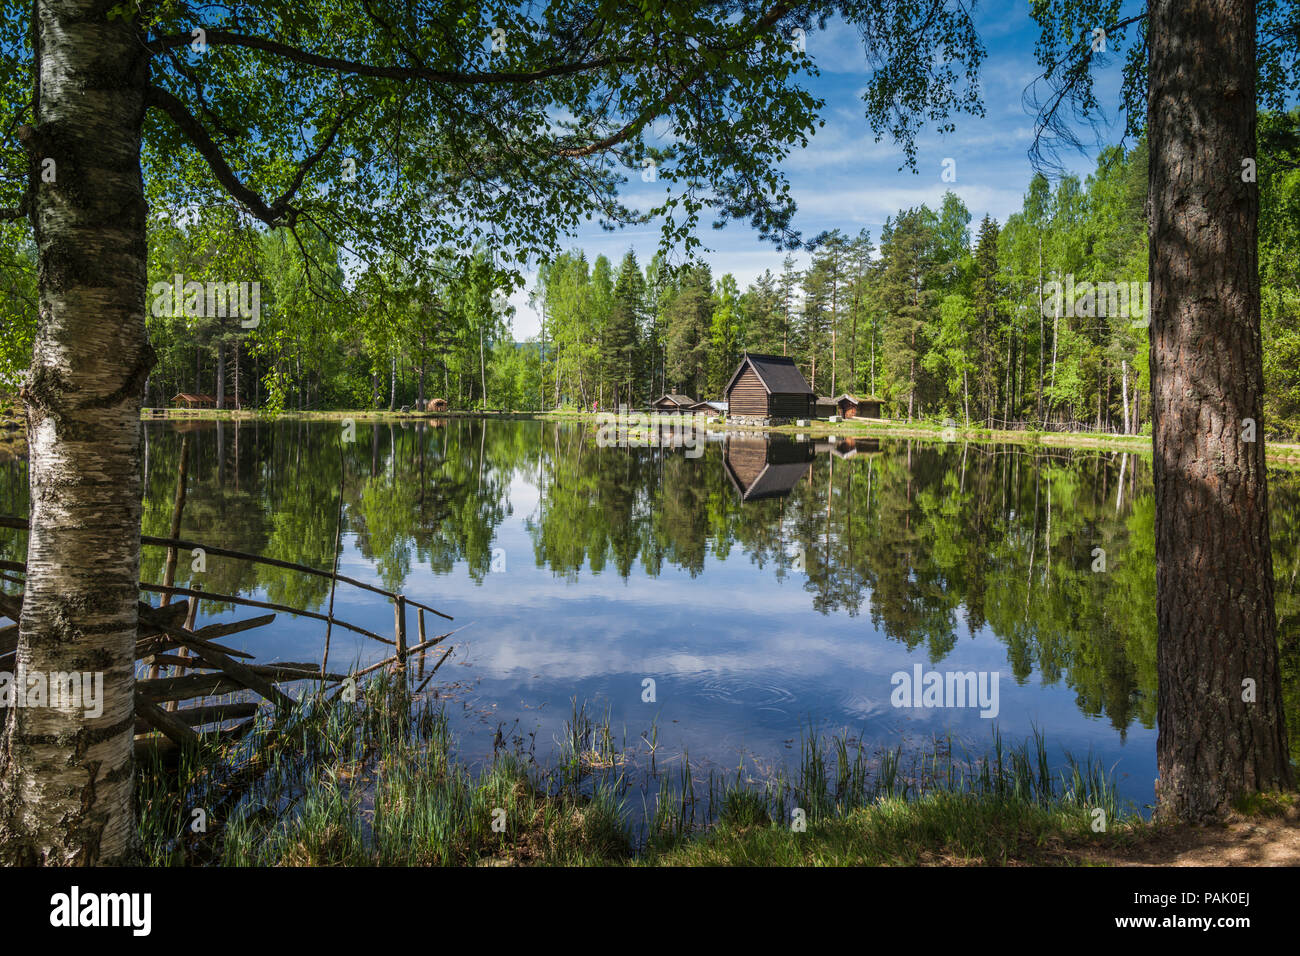 Typical Norwegian landscape in Lillehammer, Norway. Stock Photo